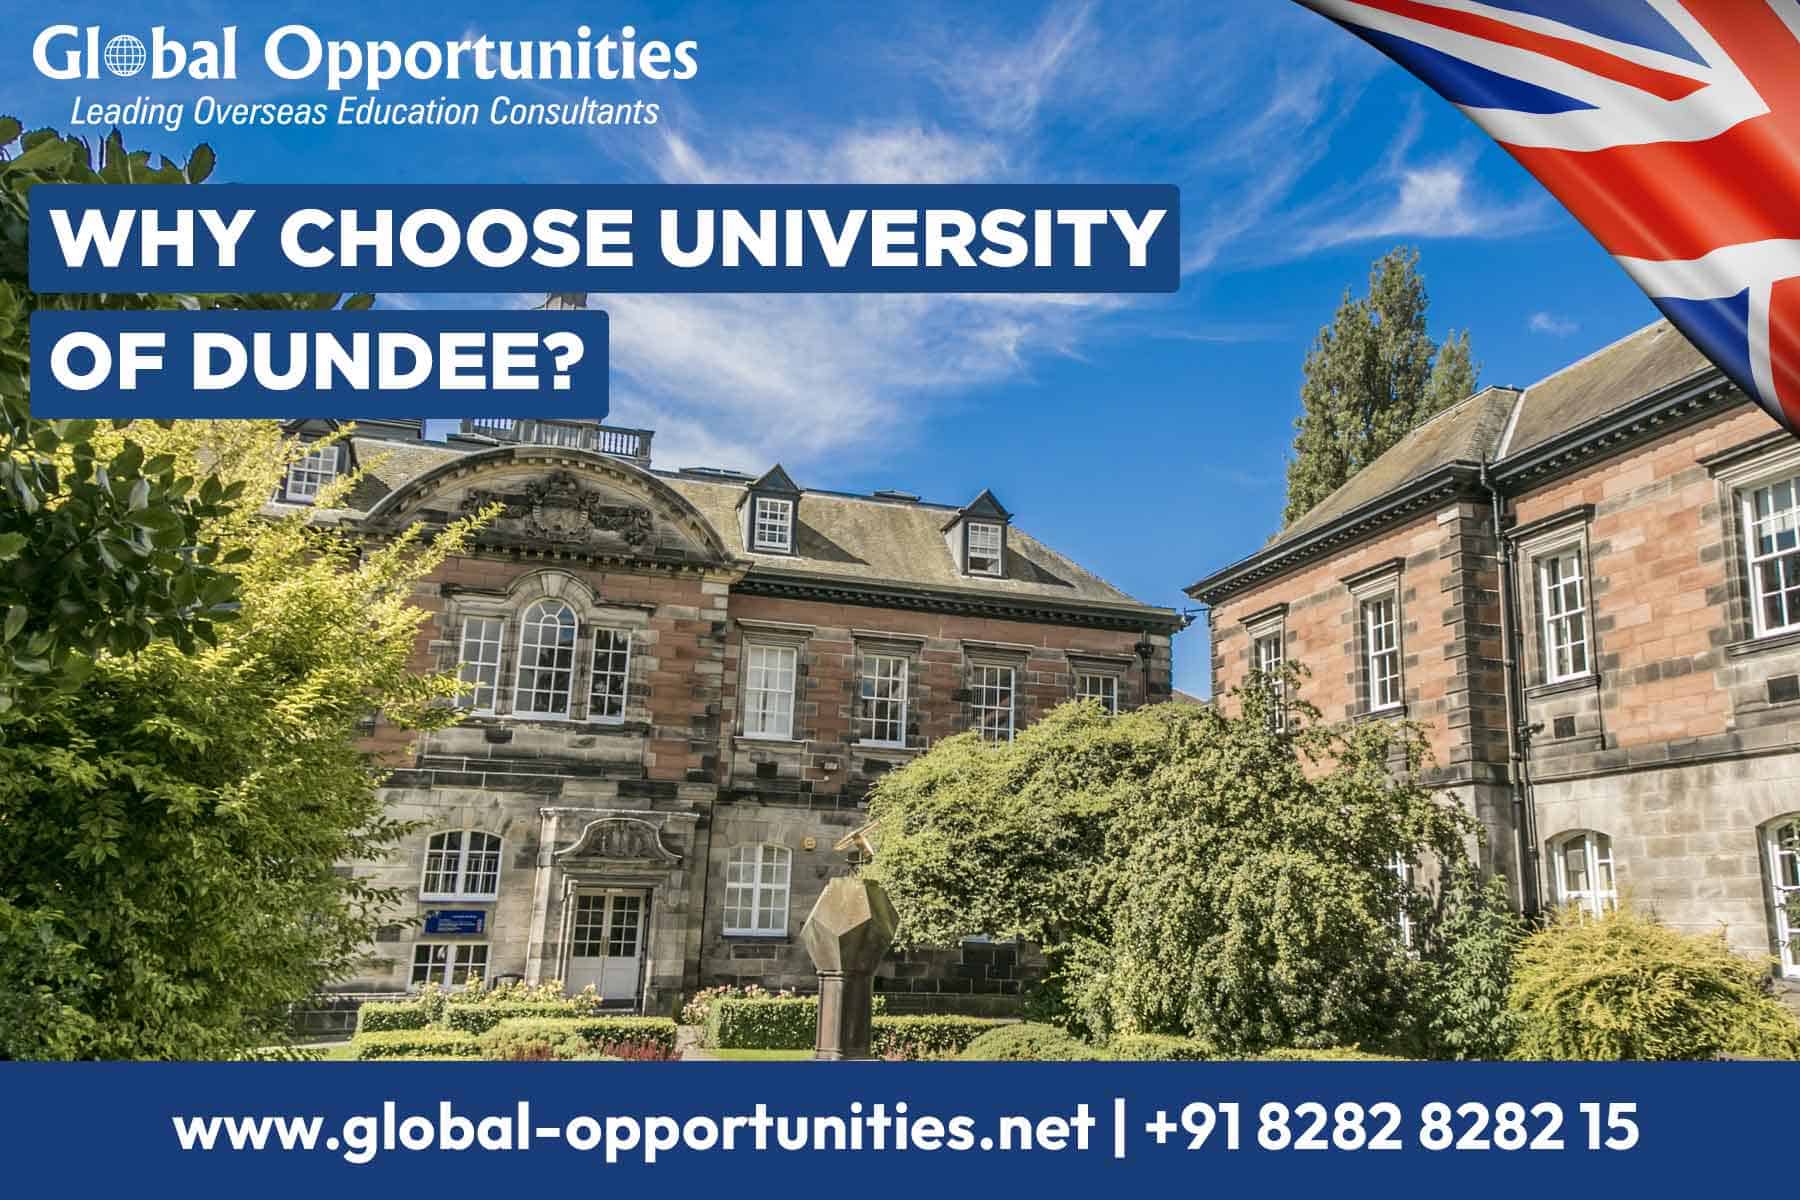 Why Choose University of Dundee?